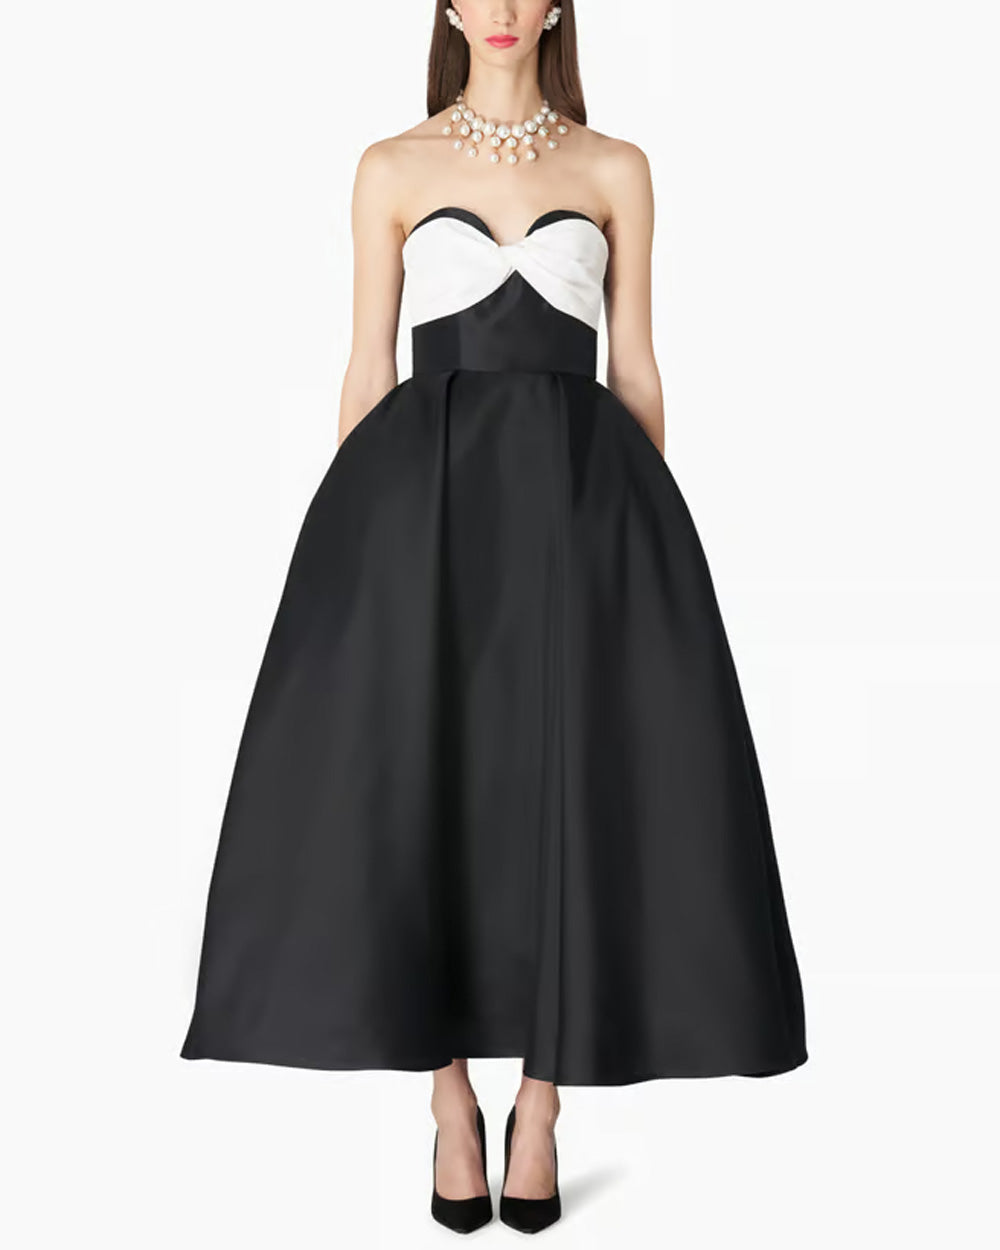 Black and White Sweetheart Strapless Dress